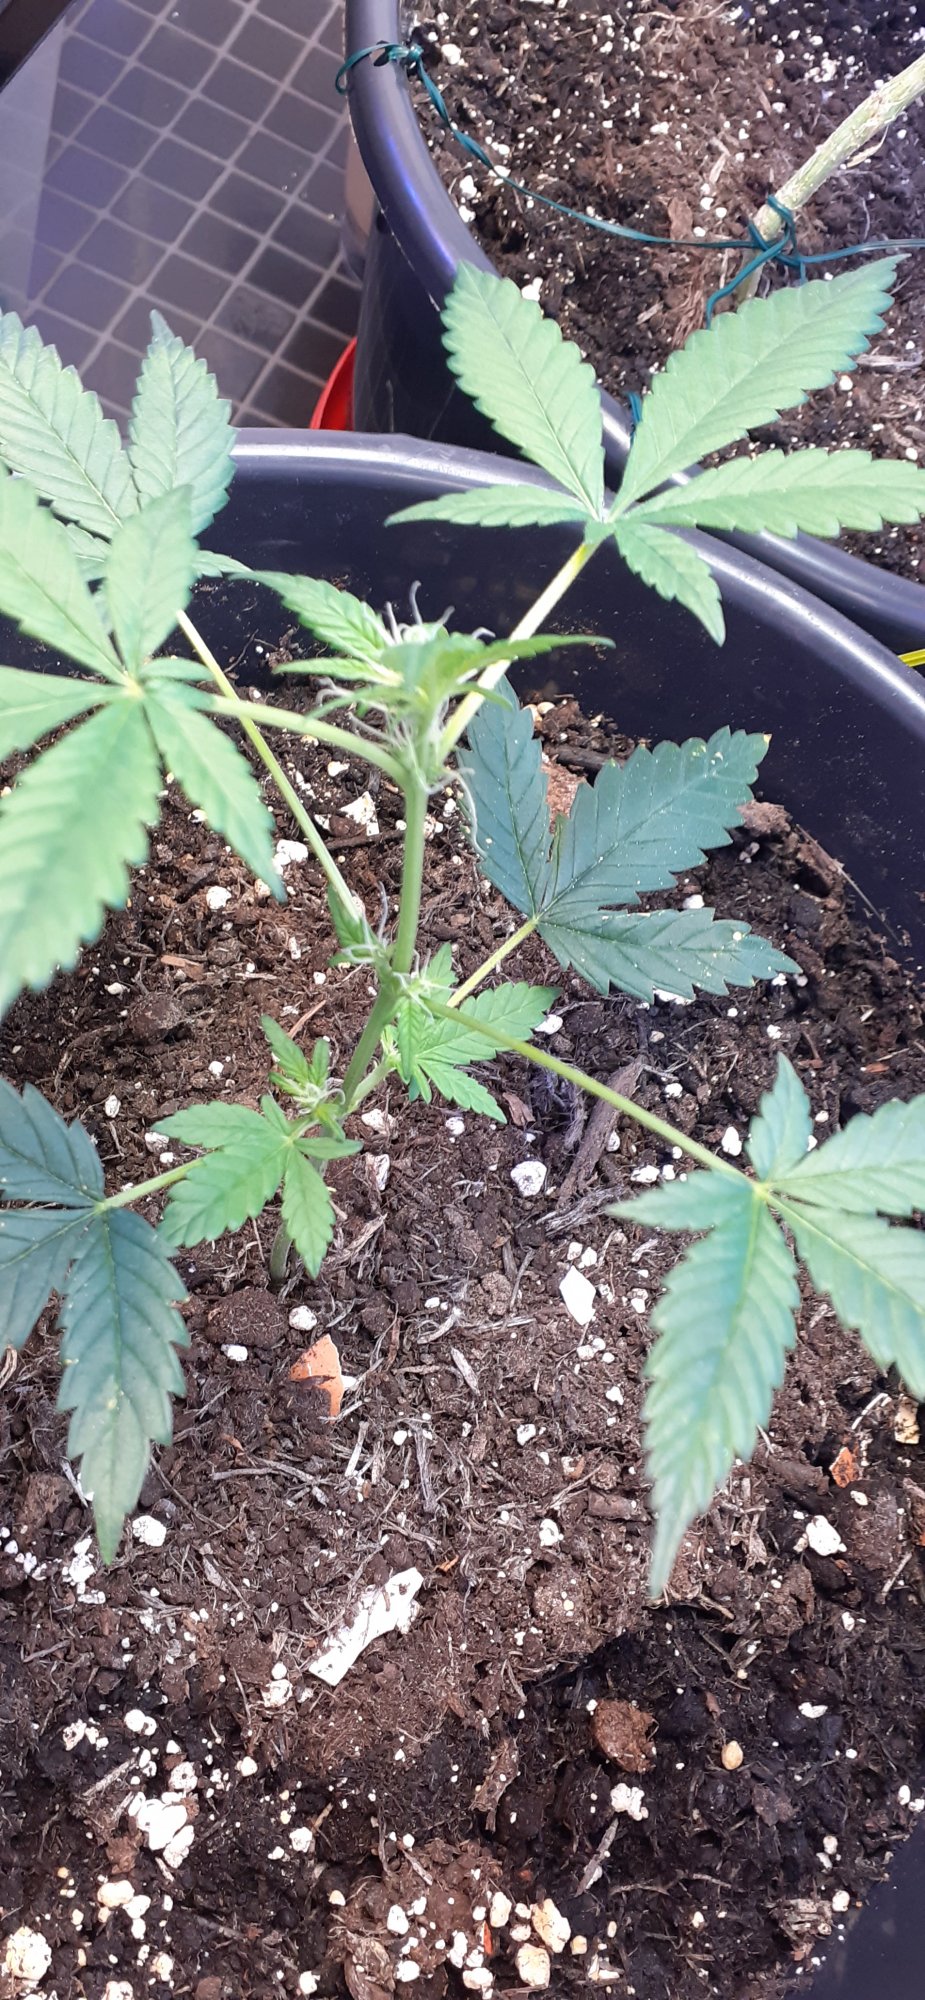 Help needed from a pro grower 4